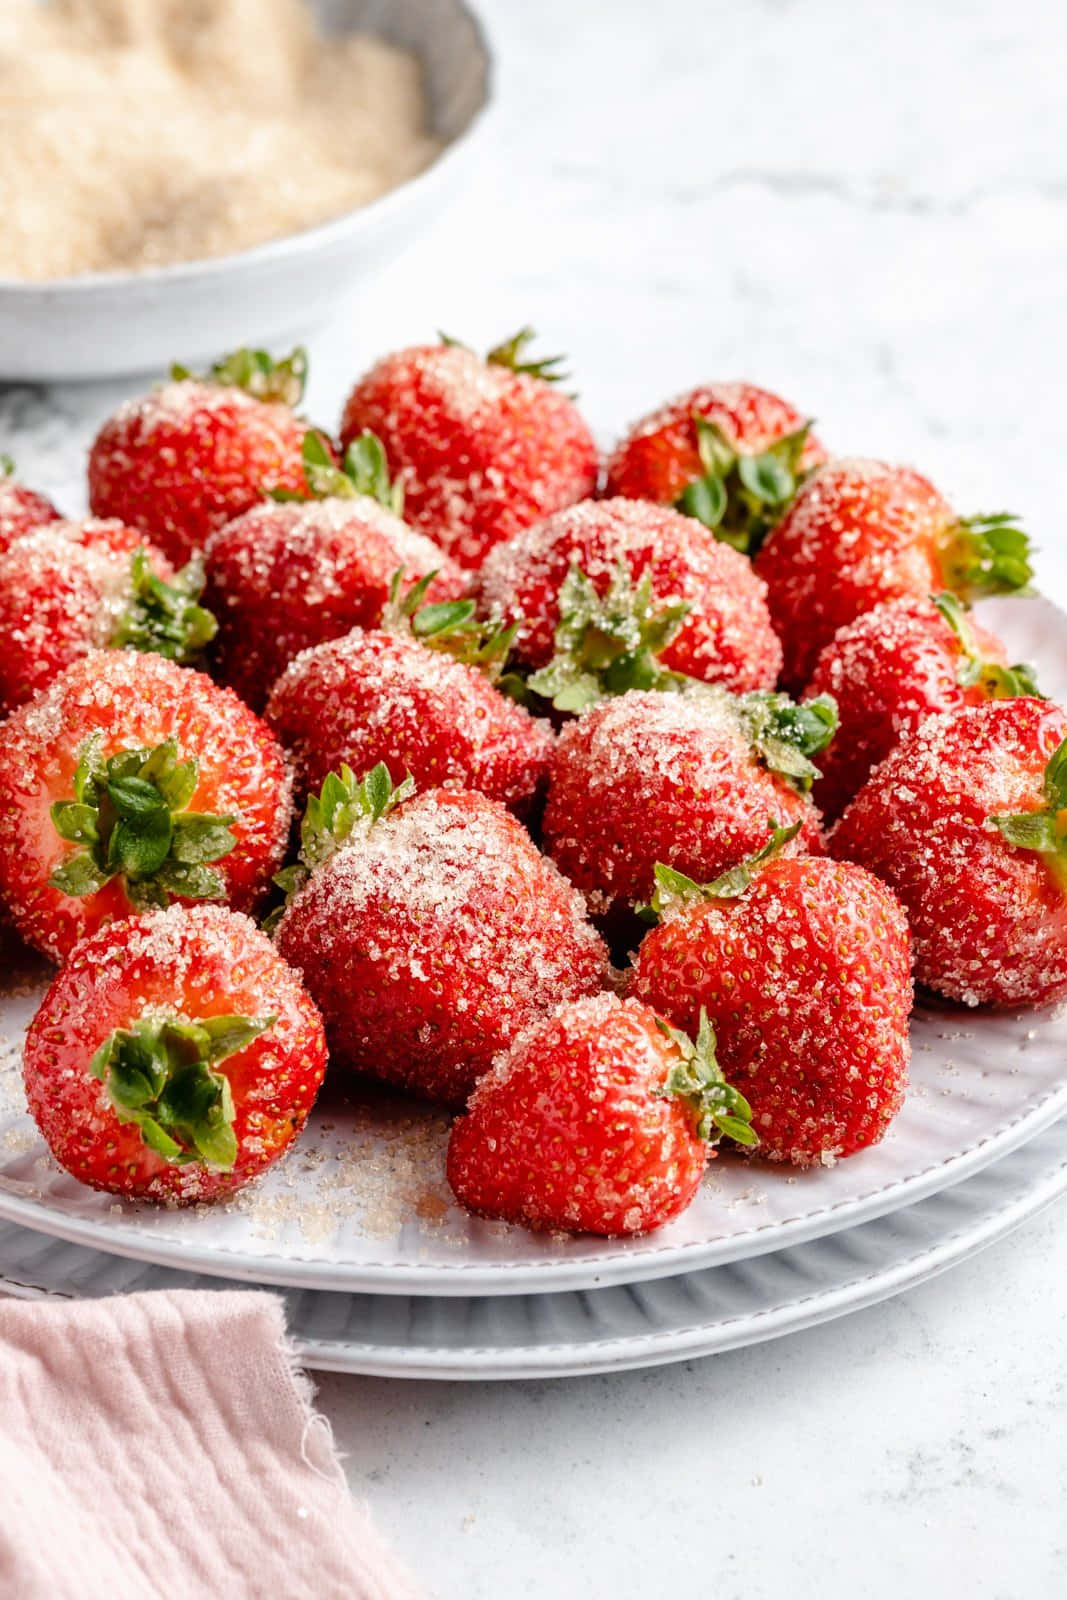 Fresh, ripe, and sustainable – the perfect strawberry!